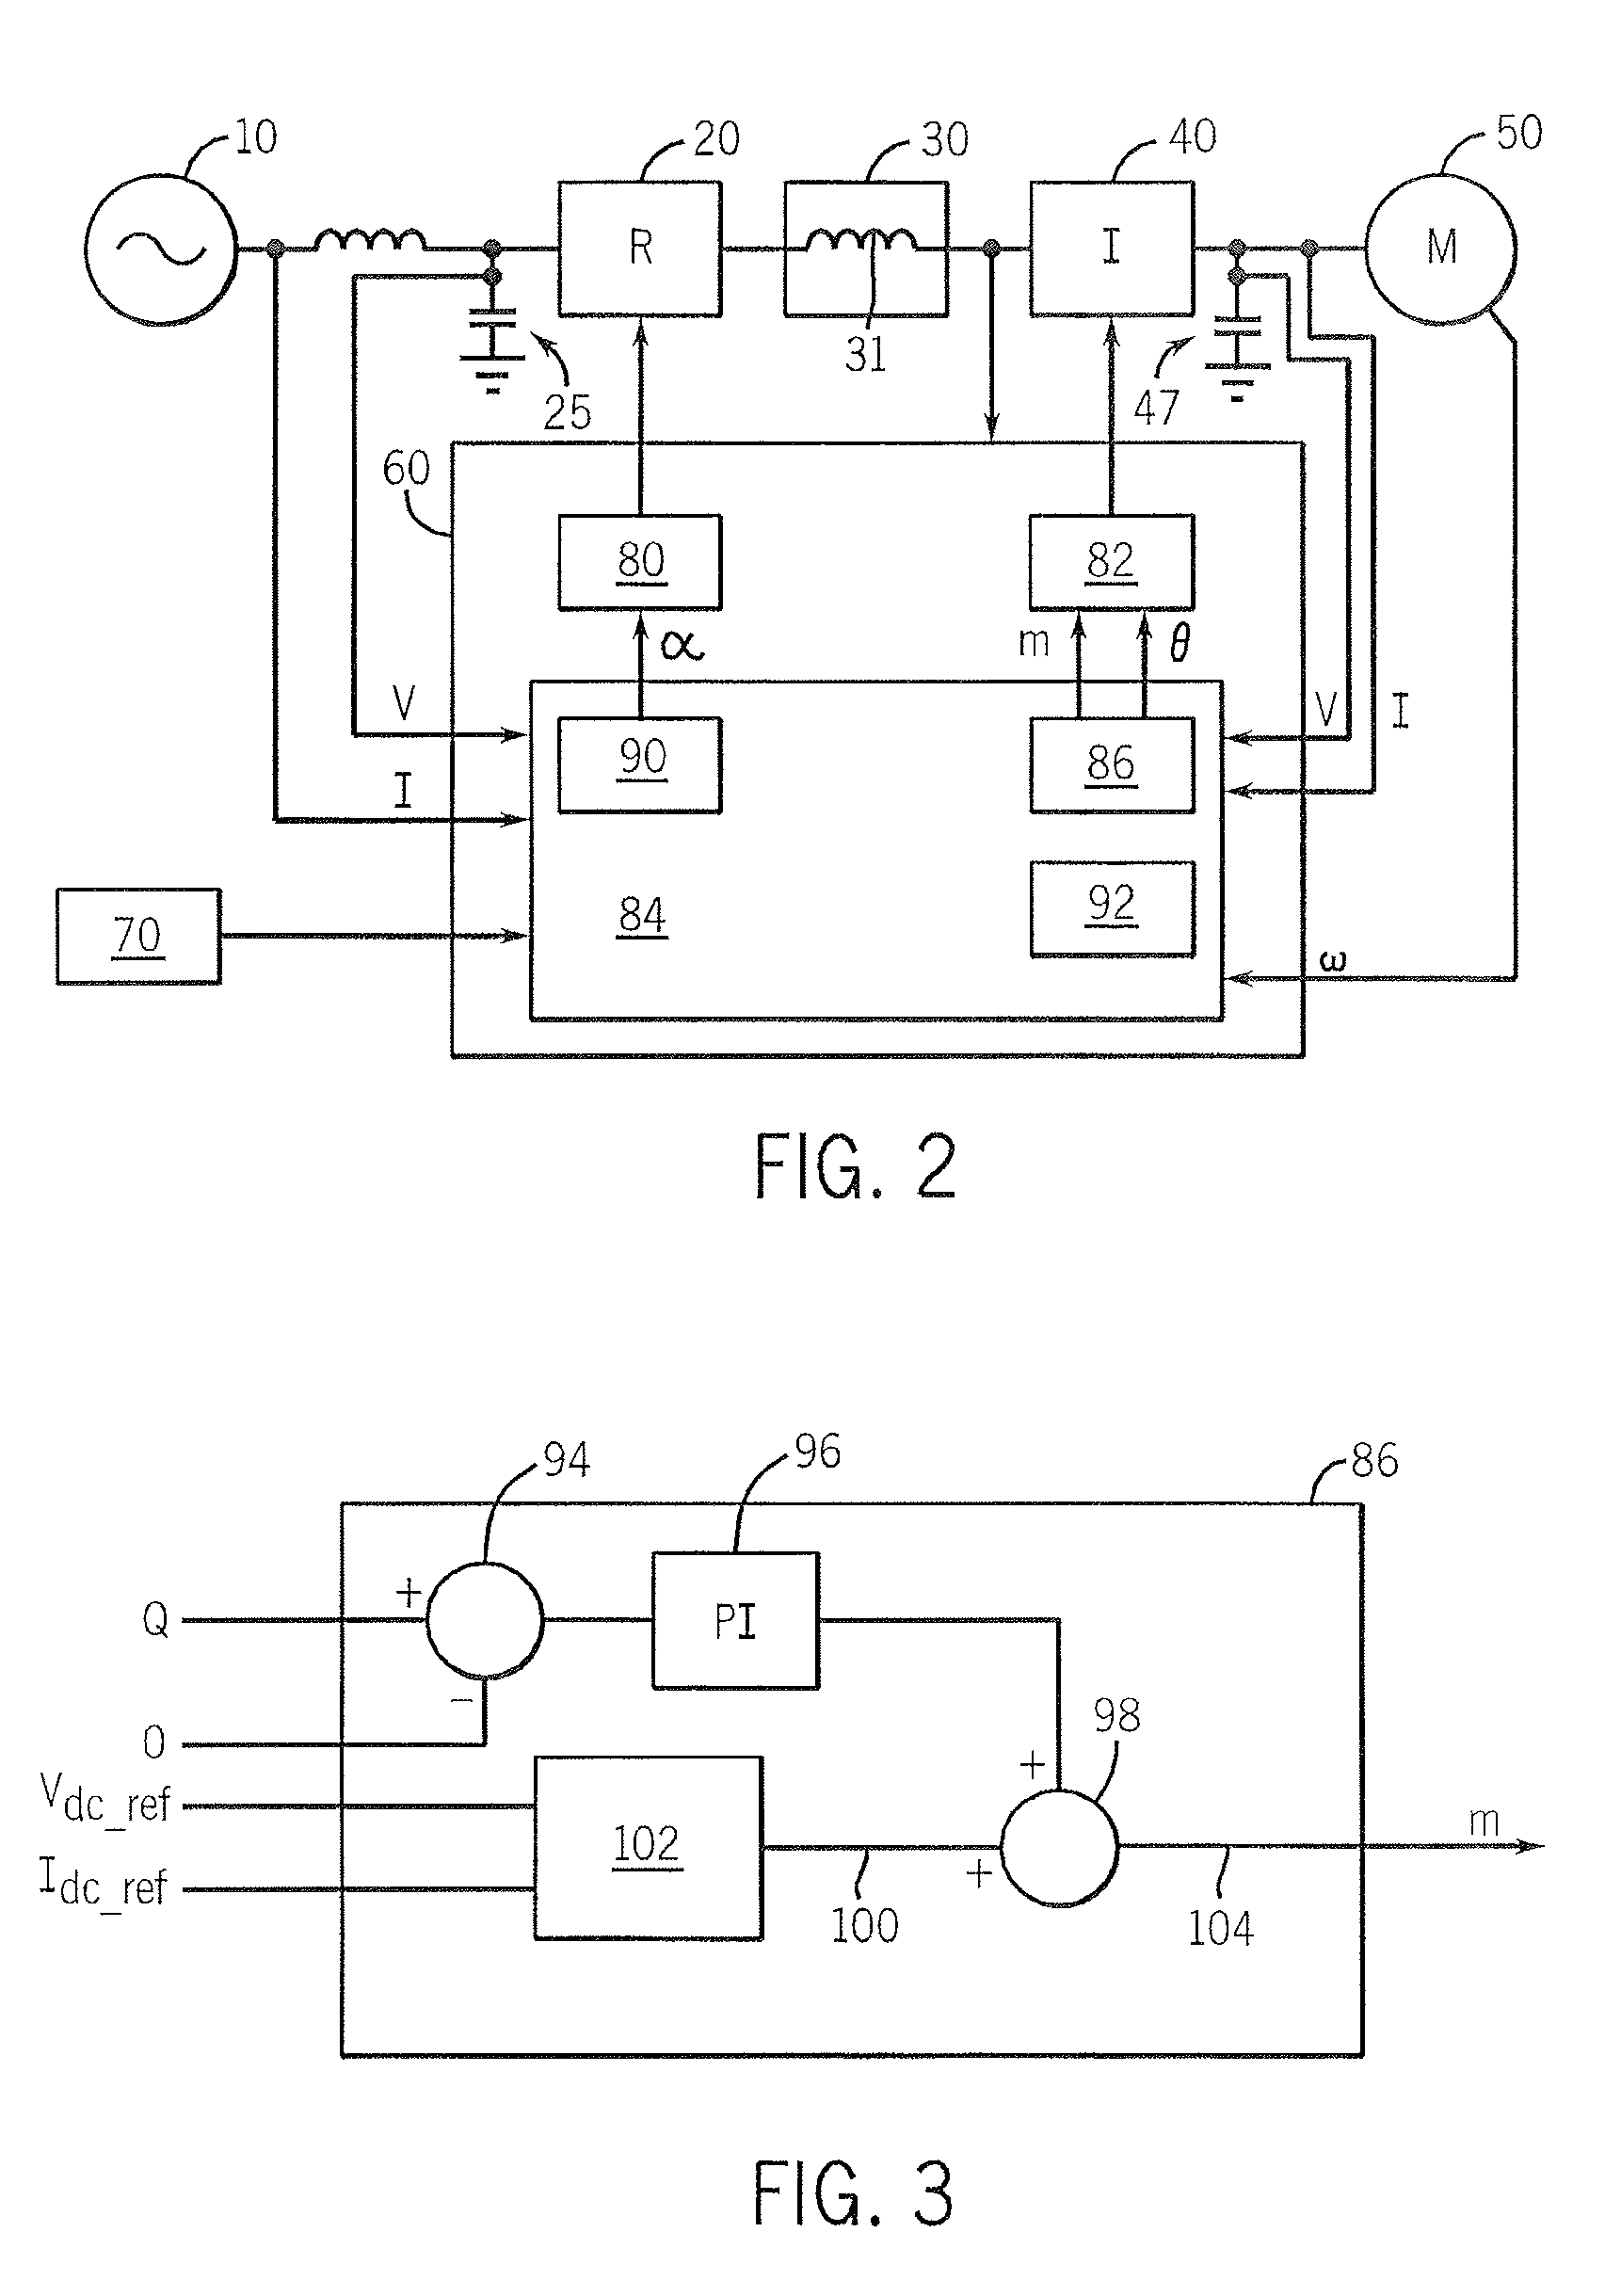 Motor drive using flux adjustment to control power factor